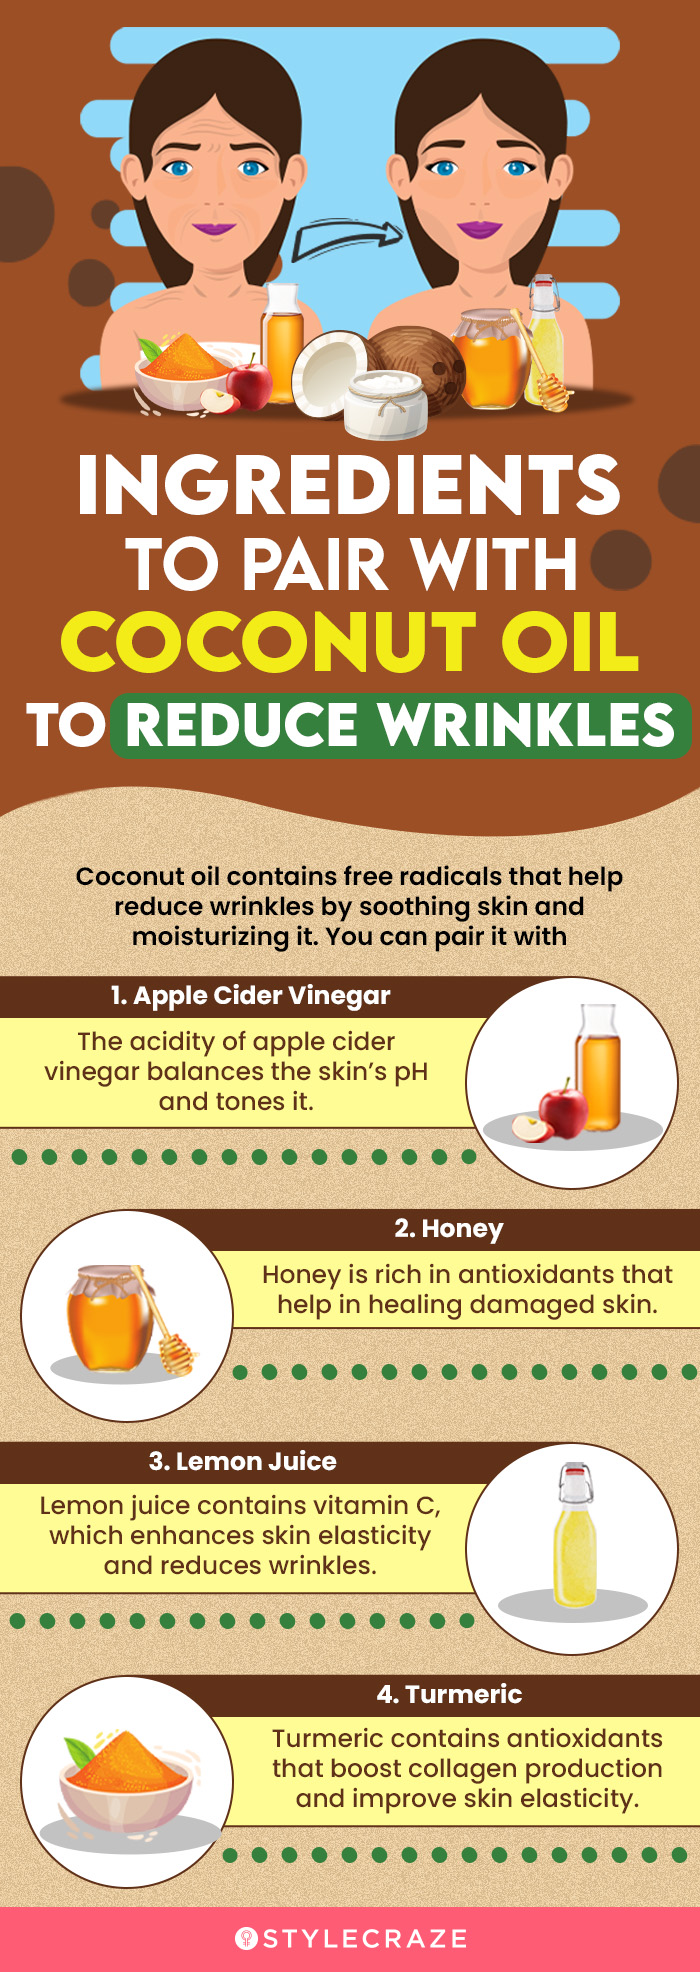 ingredients to pair with coconut oil to reduce wrinkles [infographic]